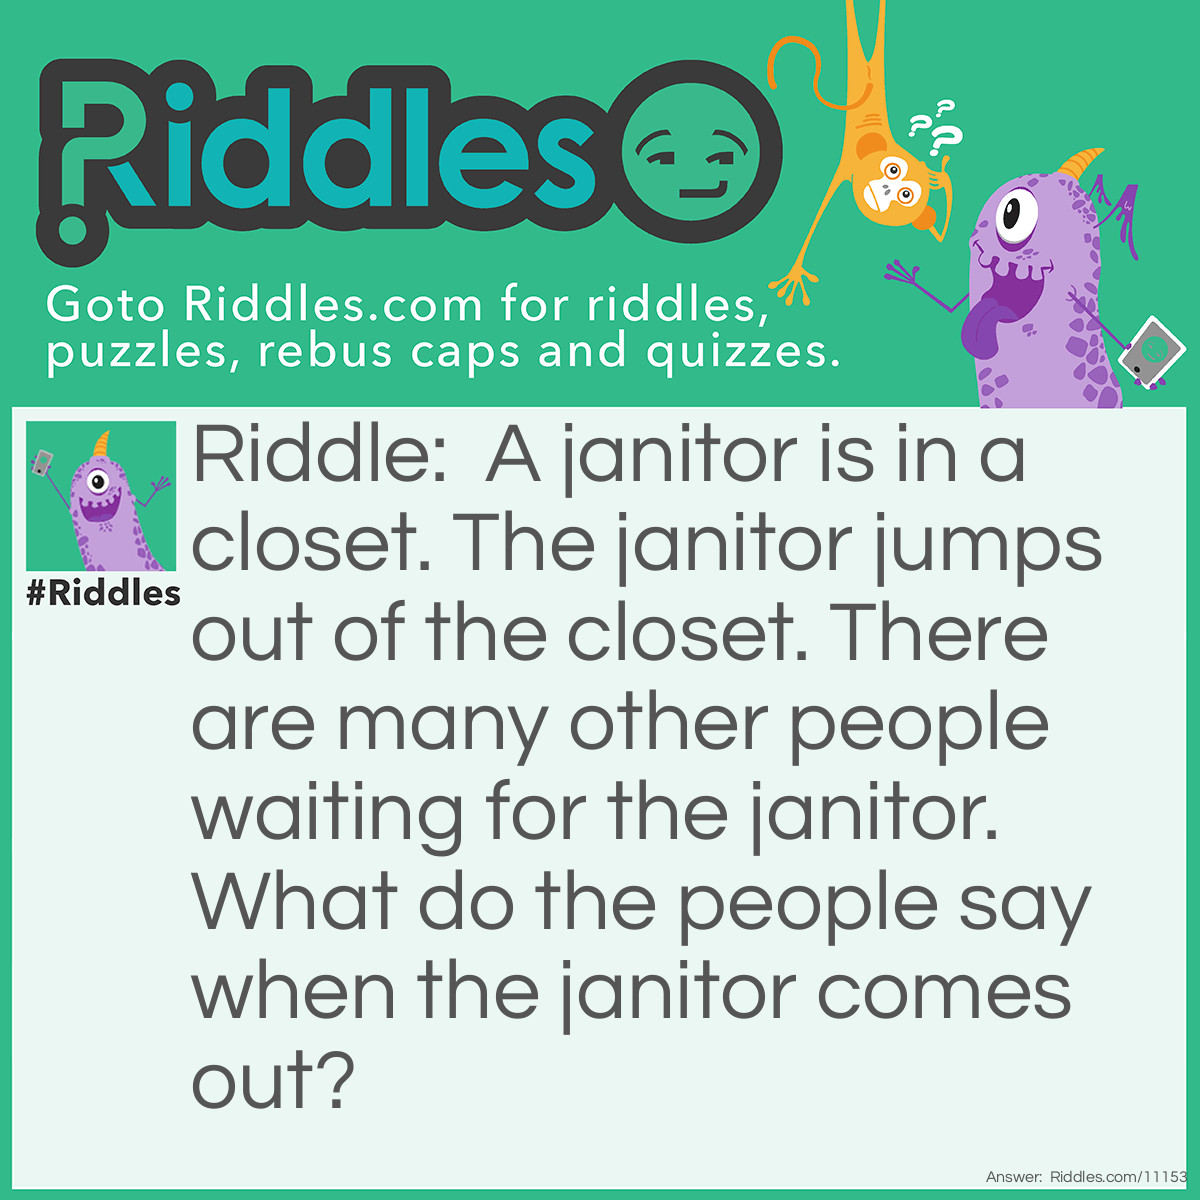 Riddle: A janitor is in a closet. The janitor jumps out of the closet. There are many other people waiting for the janitor. What do the people say when the janitor comes out? Answer: "SUPPLIES" (Surprise).